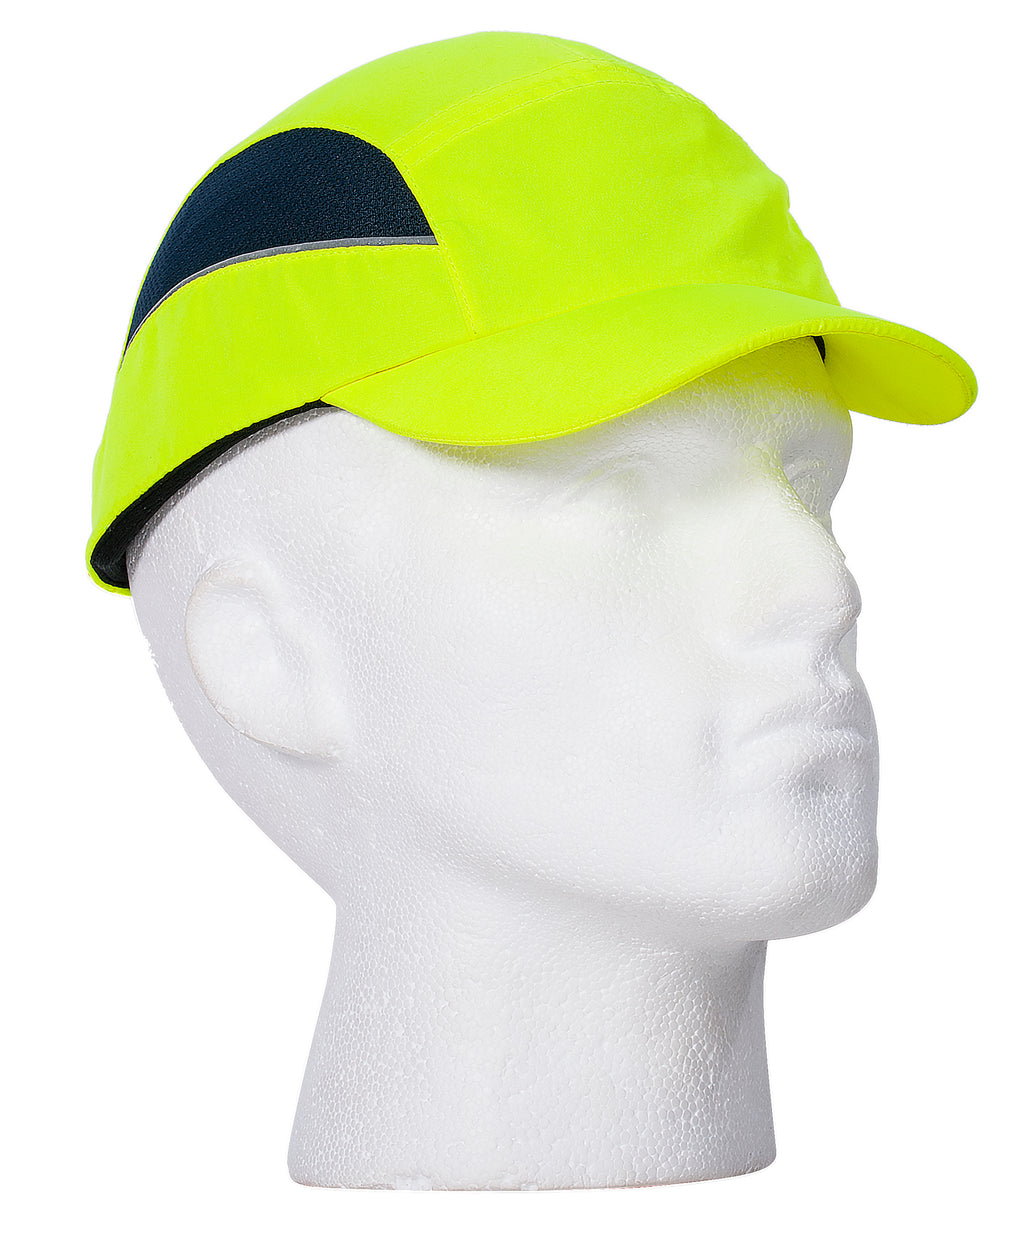 Portwest PS59 AirTech Hi-Vis Safety Bump Cap with Breathable Mesh Side